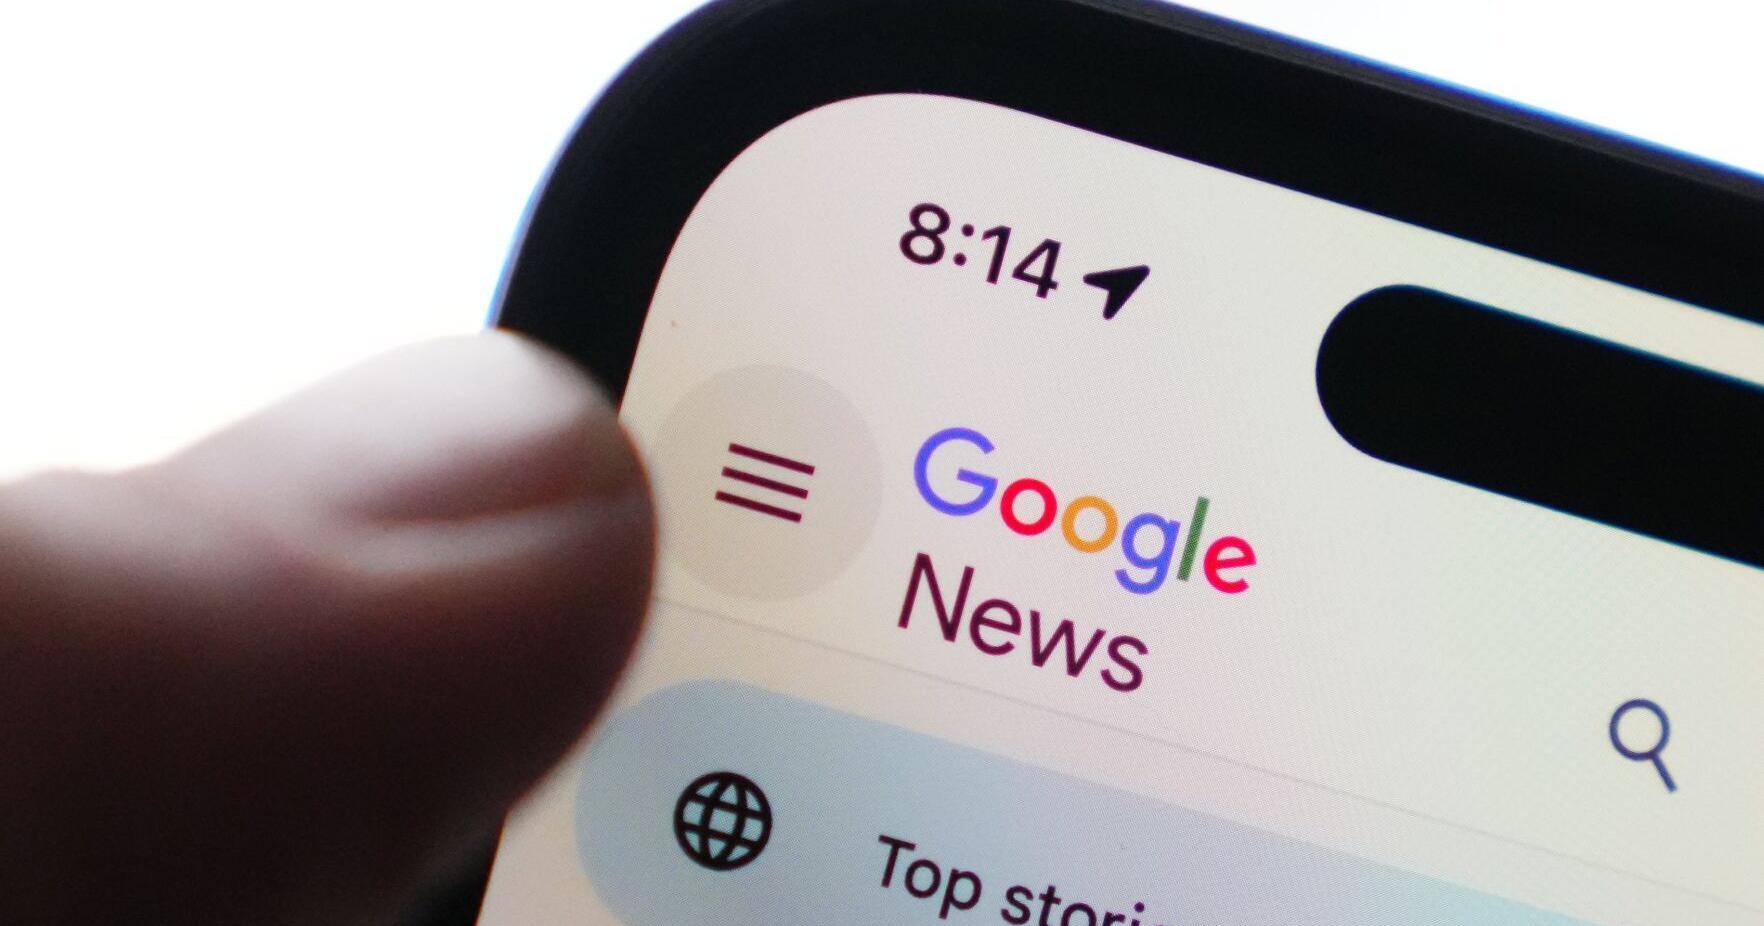 Why the Google media deal is too weak to help rescue journalism